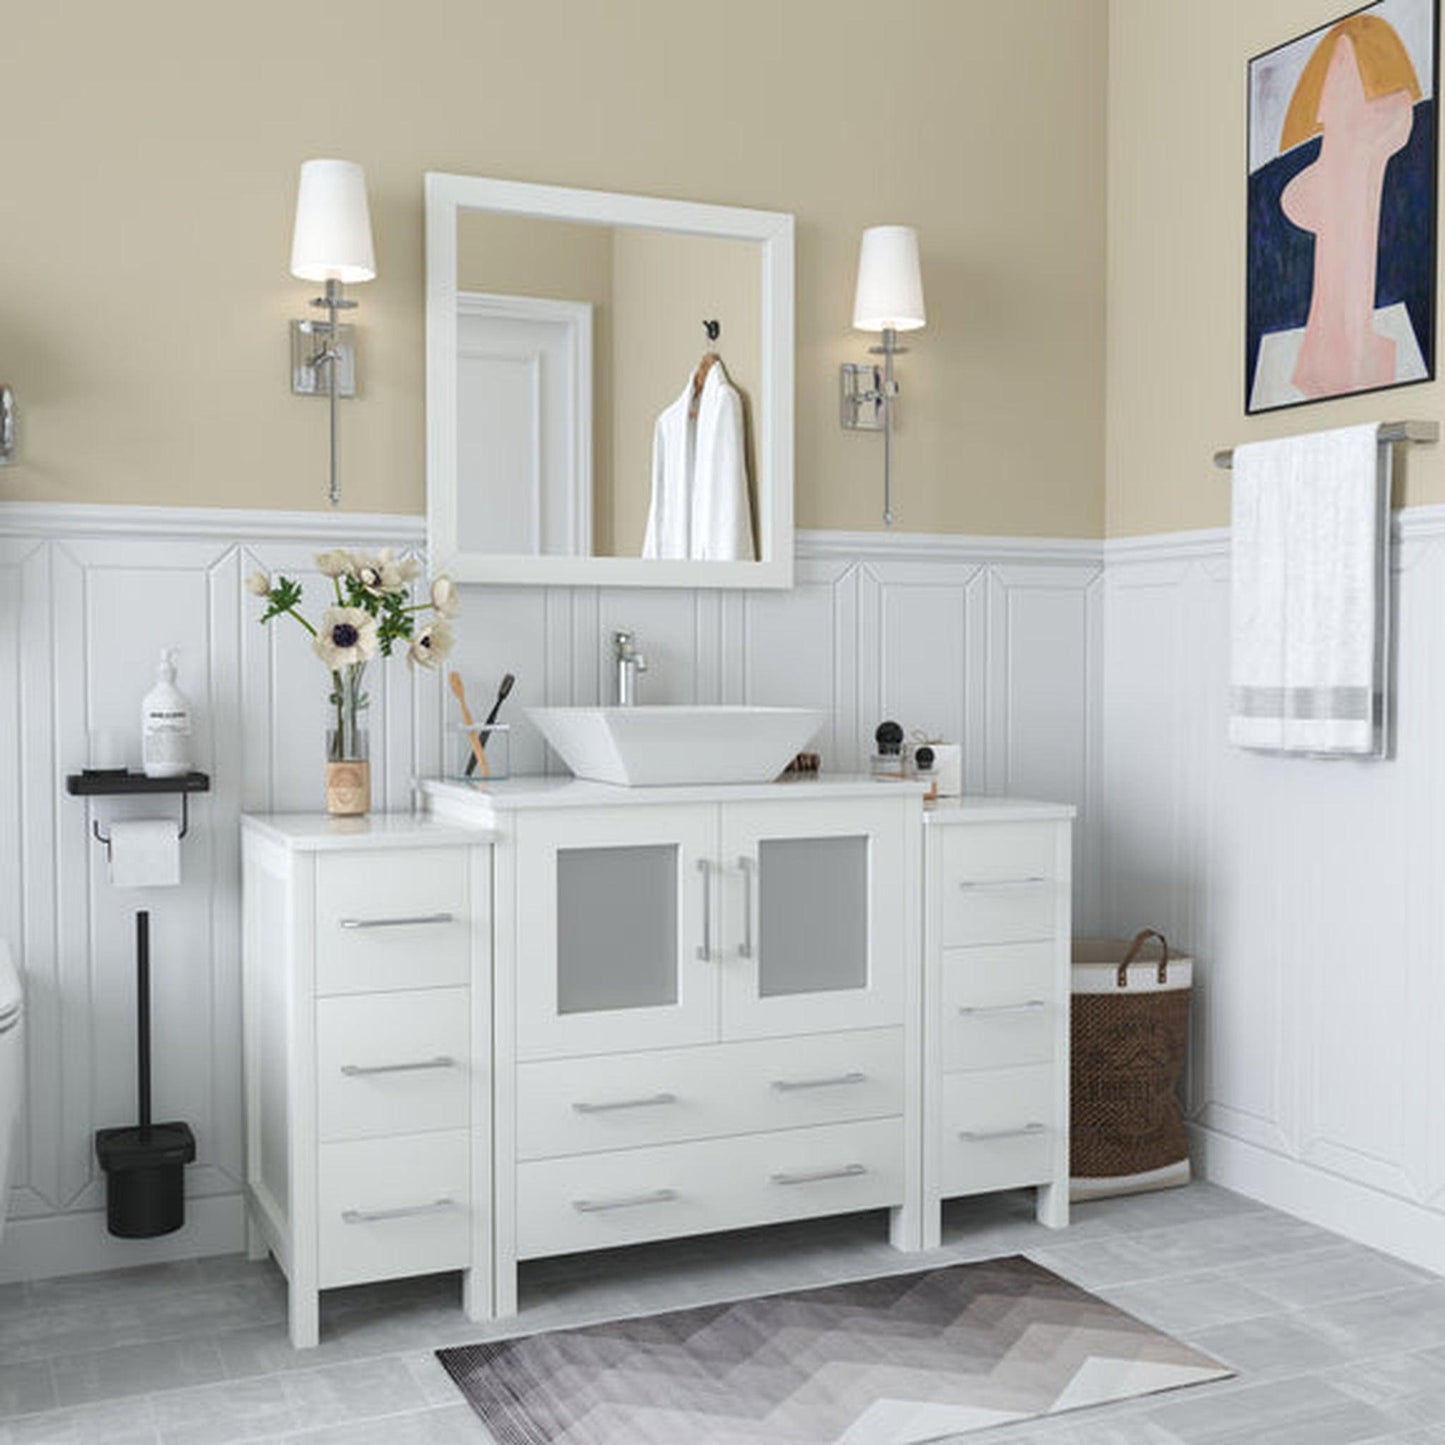 Vanity Art Ravenna 54" Single White Freestanding Vanity Set With White Engineered Marble Top, Ceramic Vessel Sink, 2 Side Cabinets and 1 Mirror